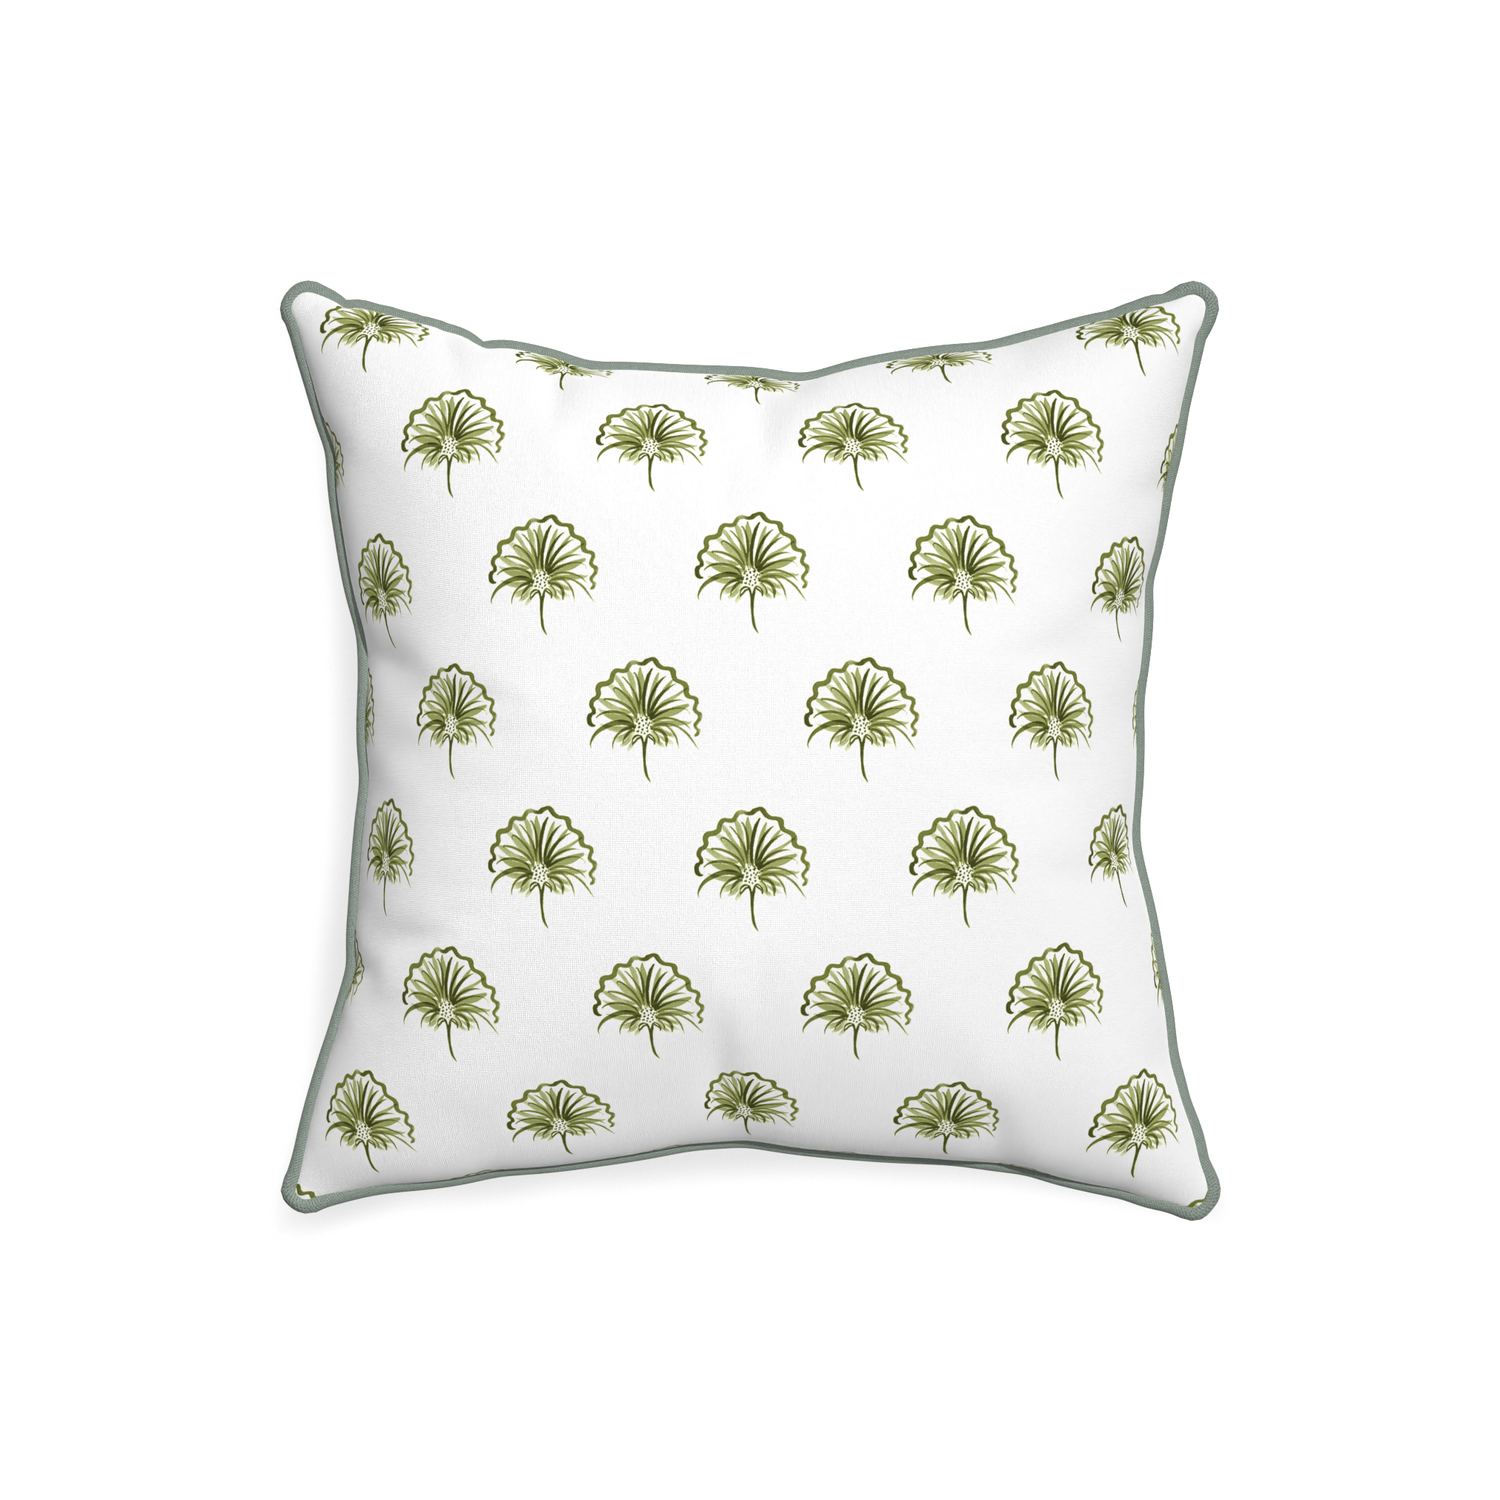 20-square penelope moss custom green floralpillow with sage piping on white background